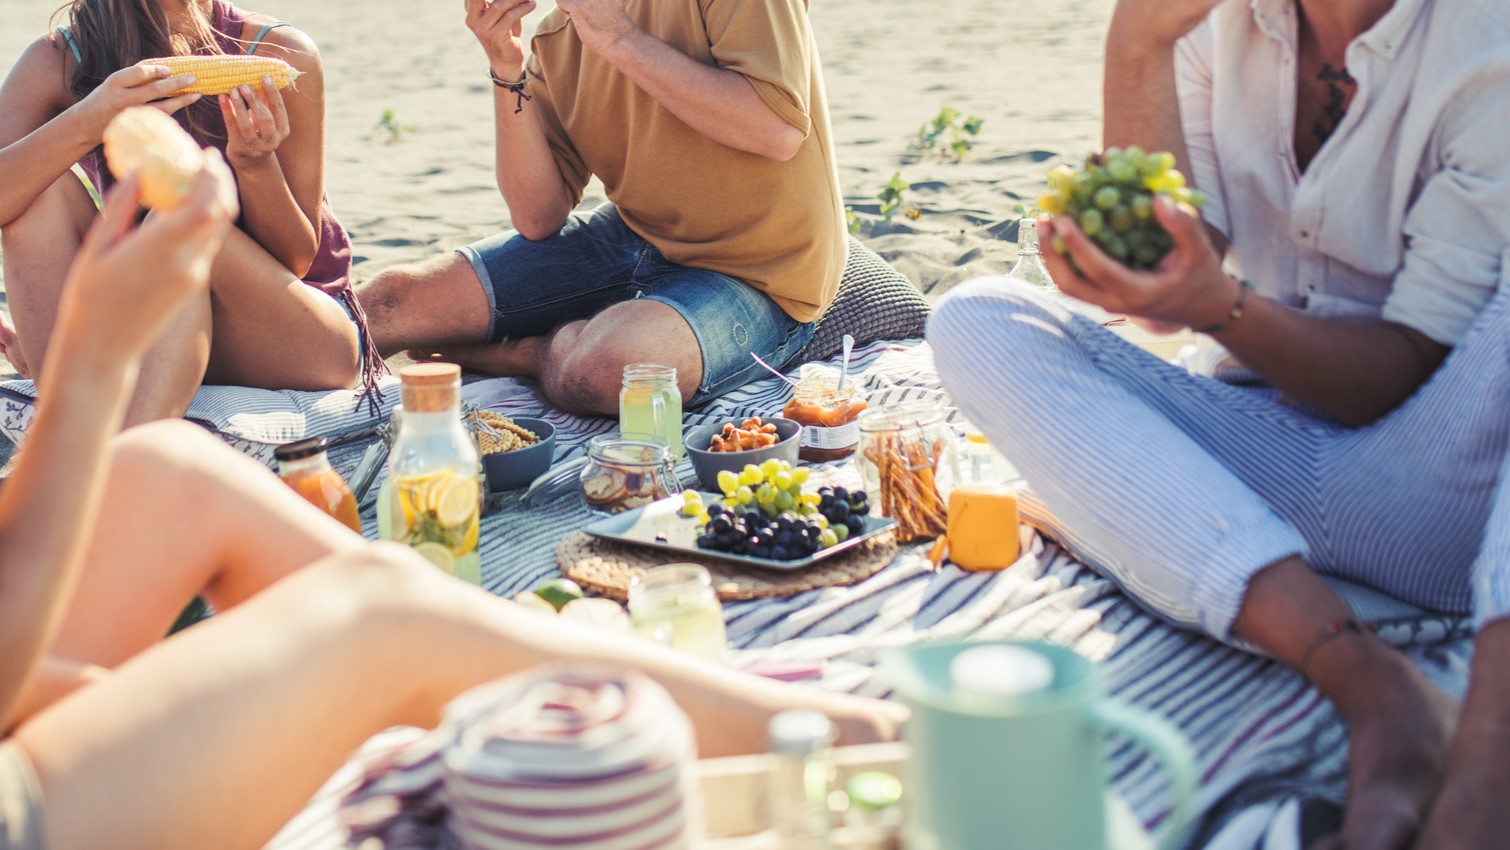 6 Healthy Foods to Bring to the Beach